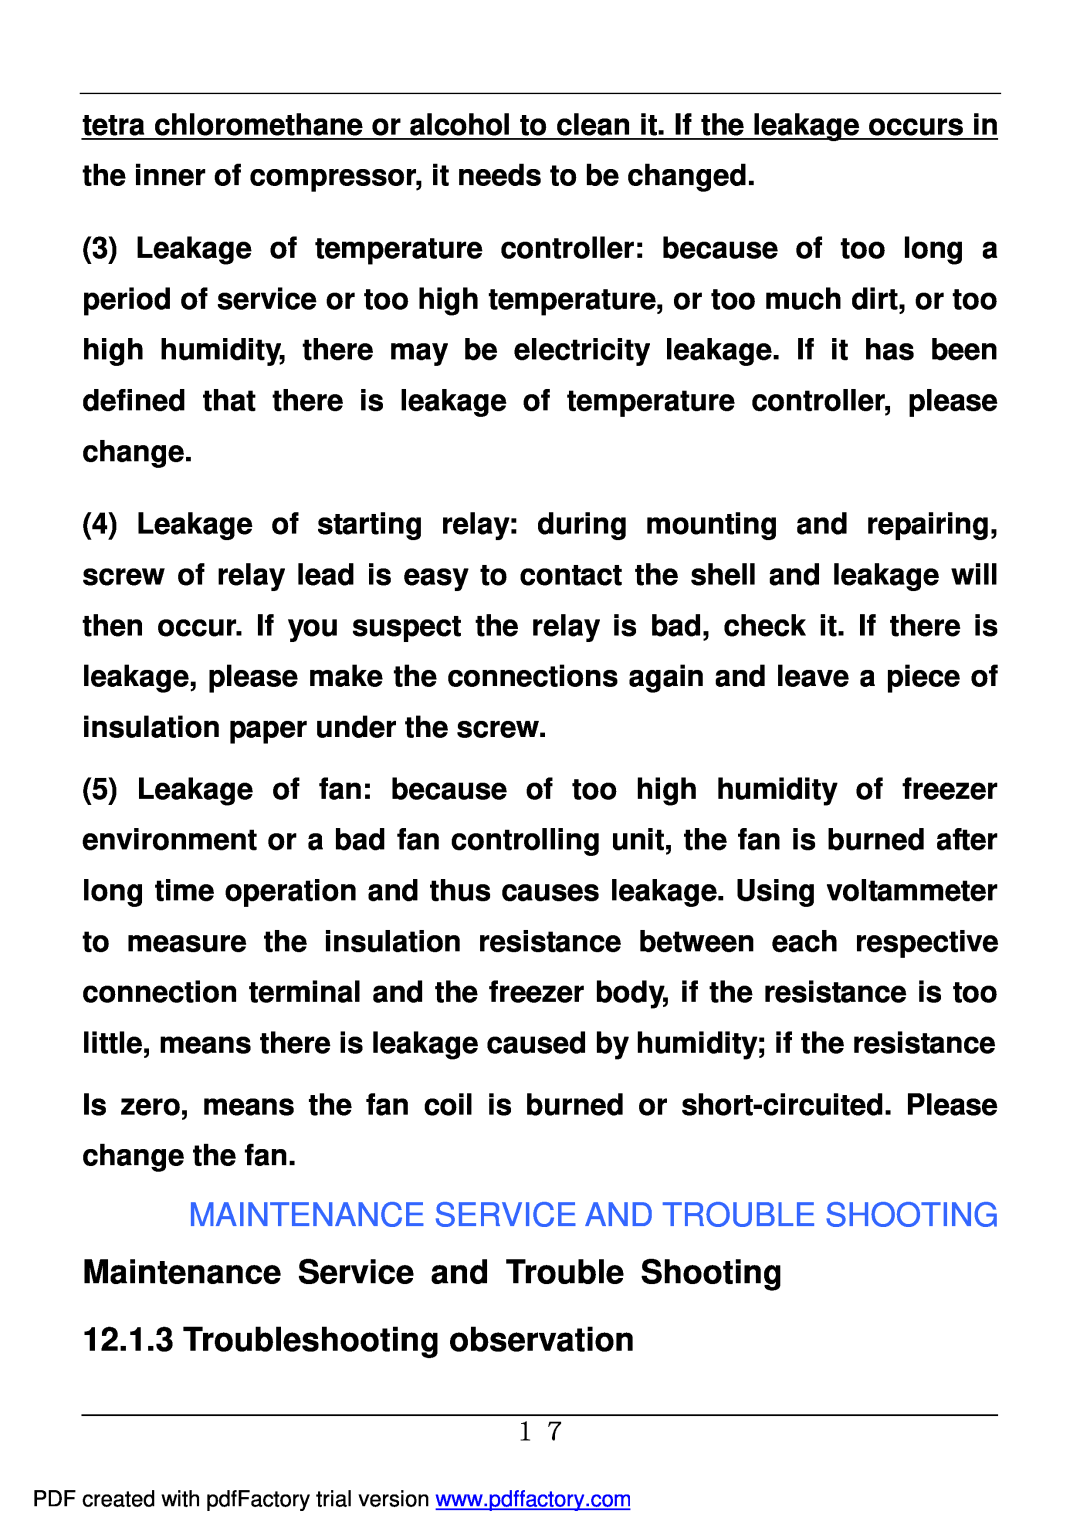 Haier BD-478A service manual Troubleshooting observation, Maintenance Service And Trouble Shooting 